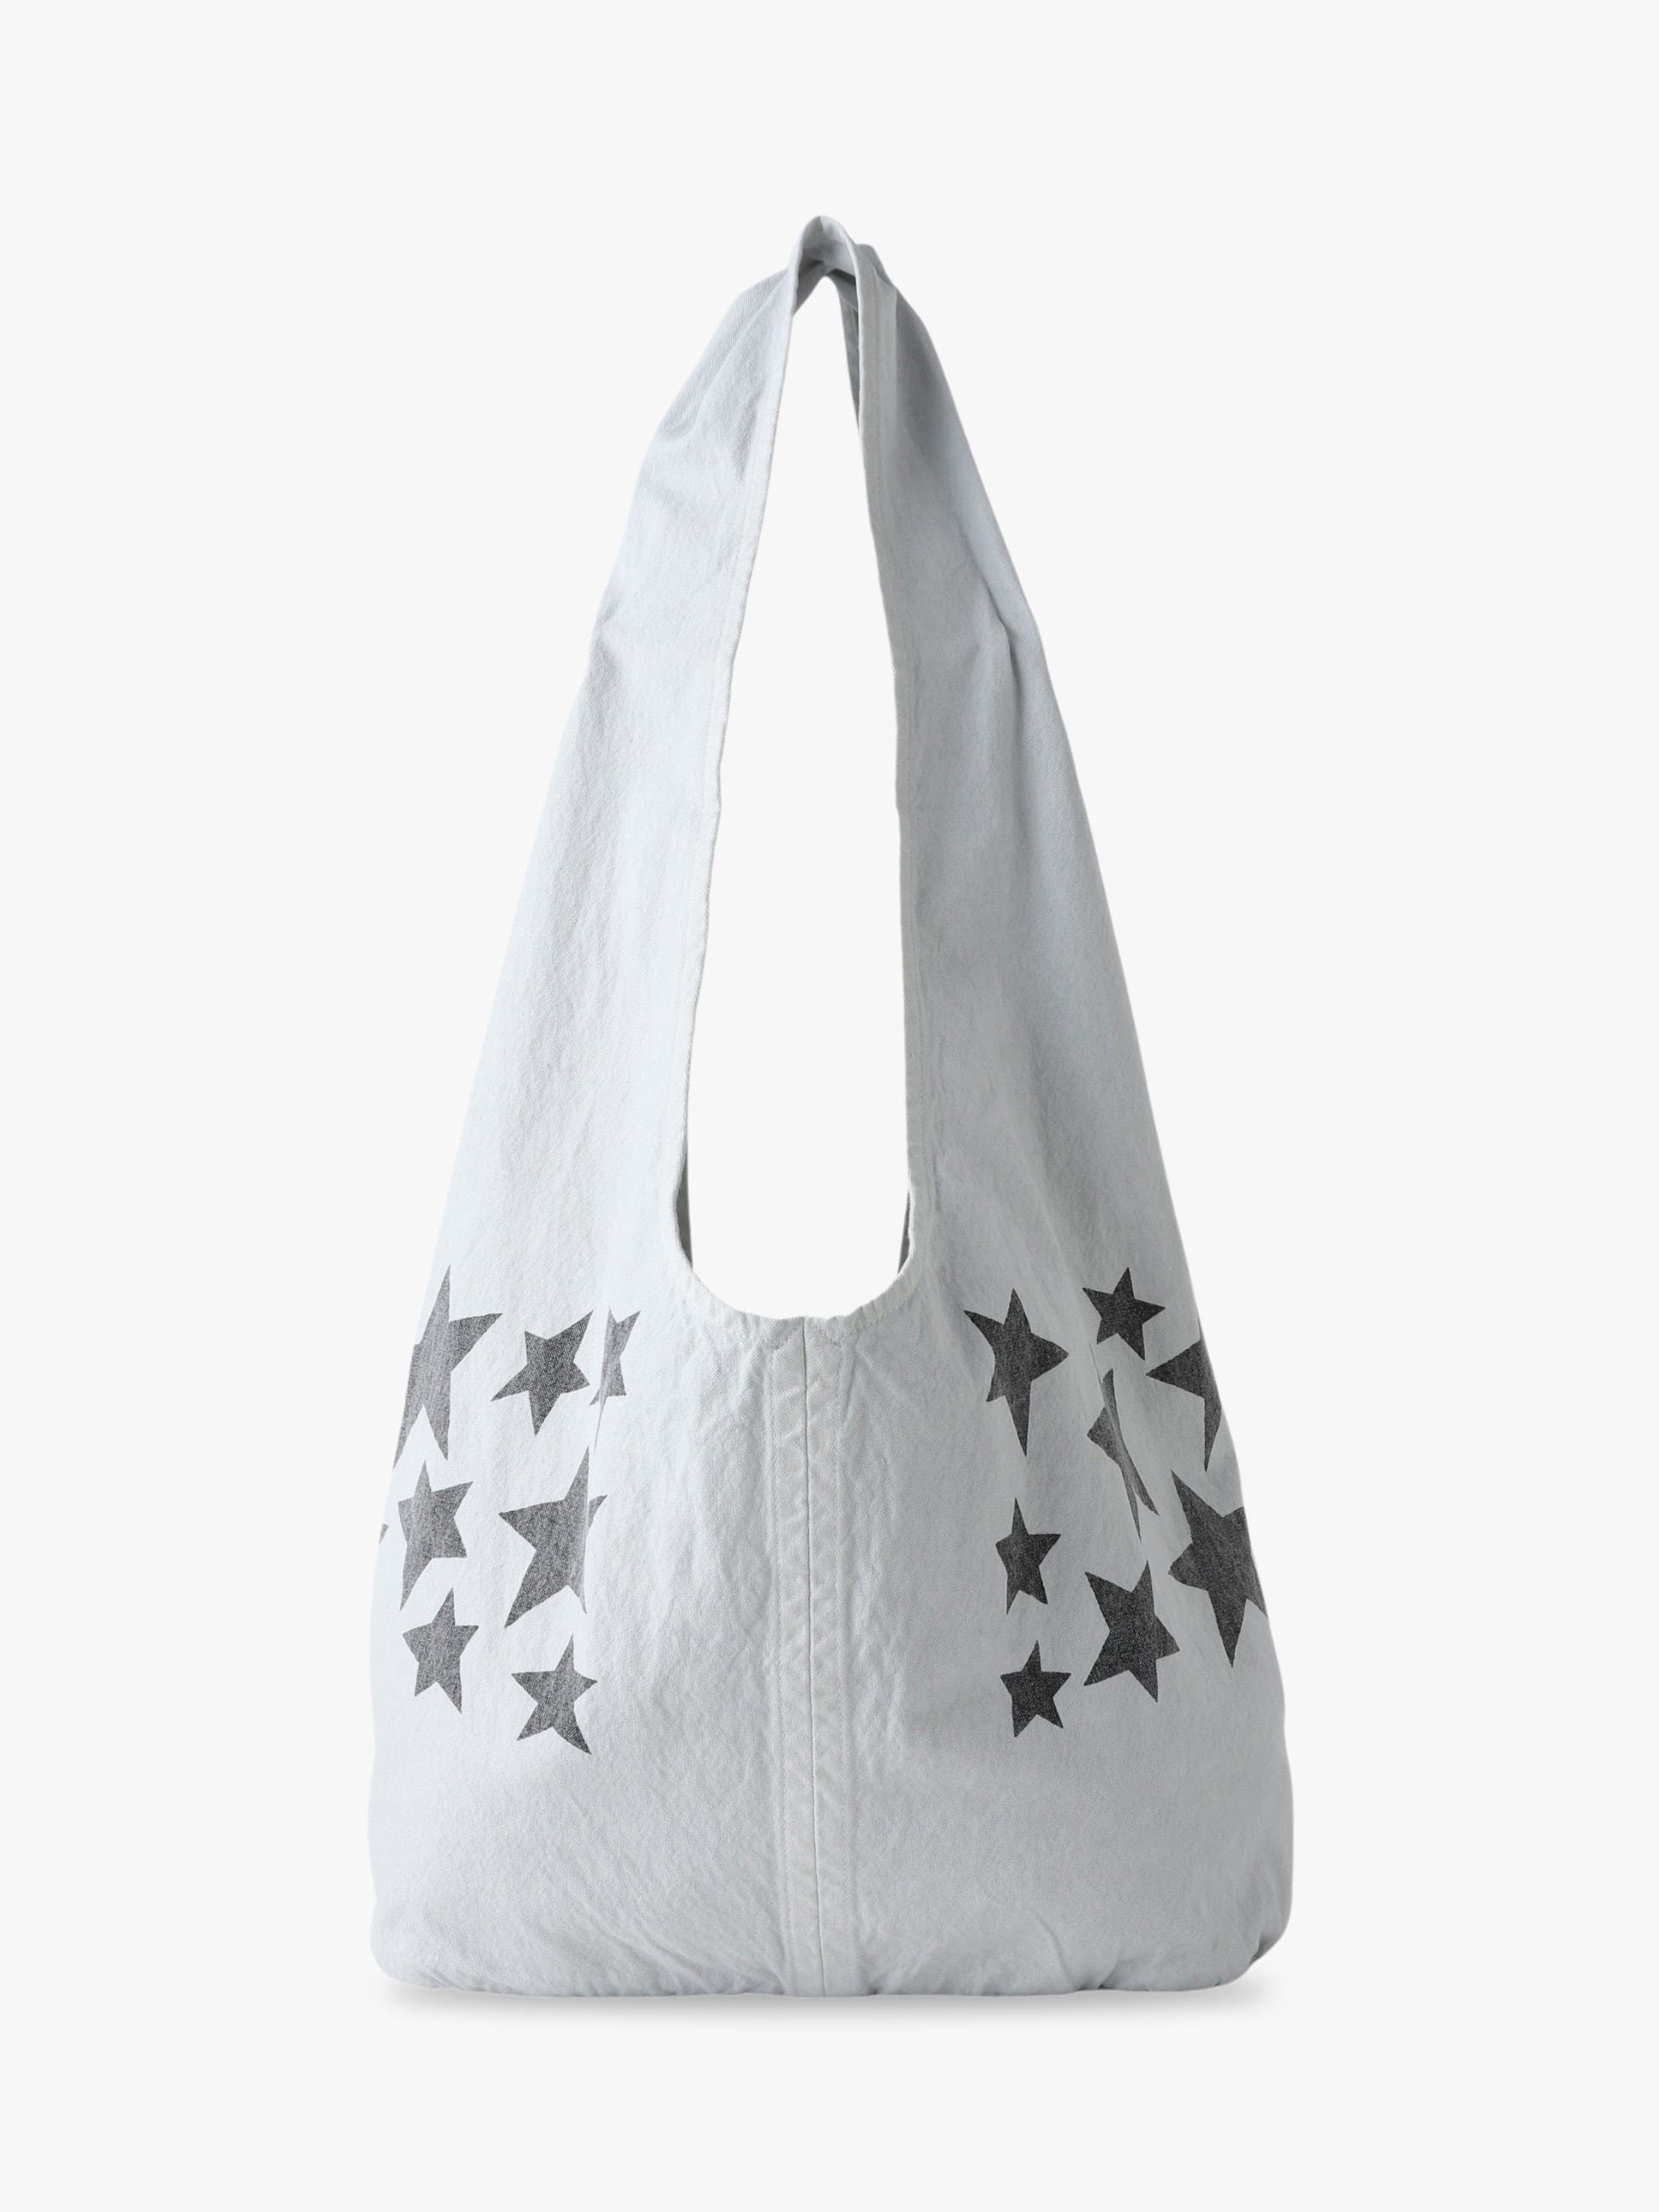 Shoulder Tote Bag (Star)｜PALM GRAPHICS(パームグラフィクス)｜Ron